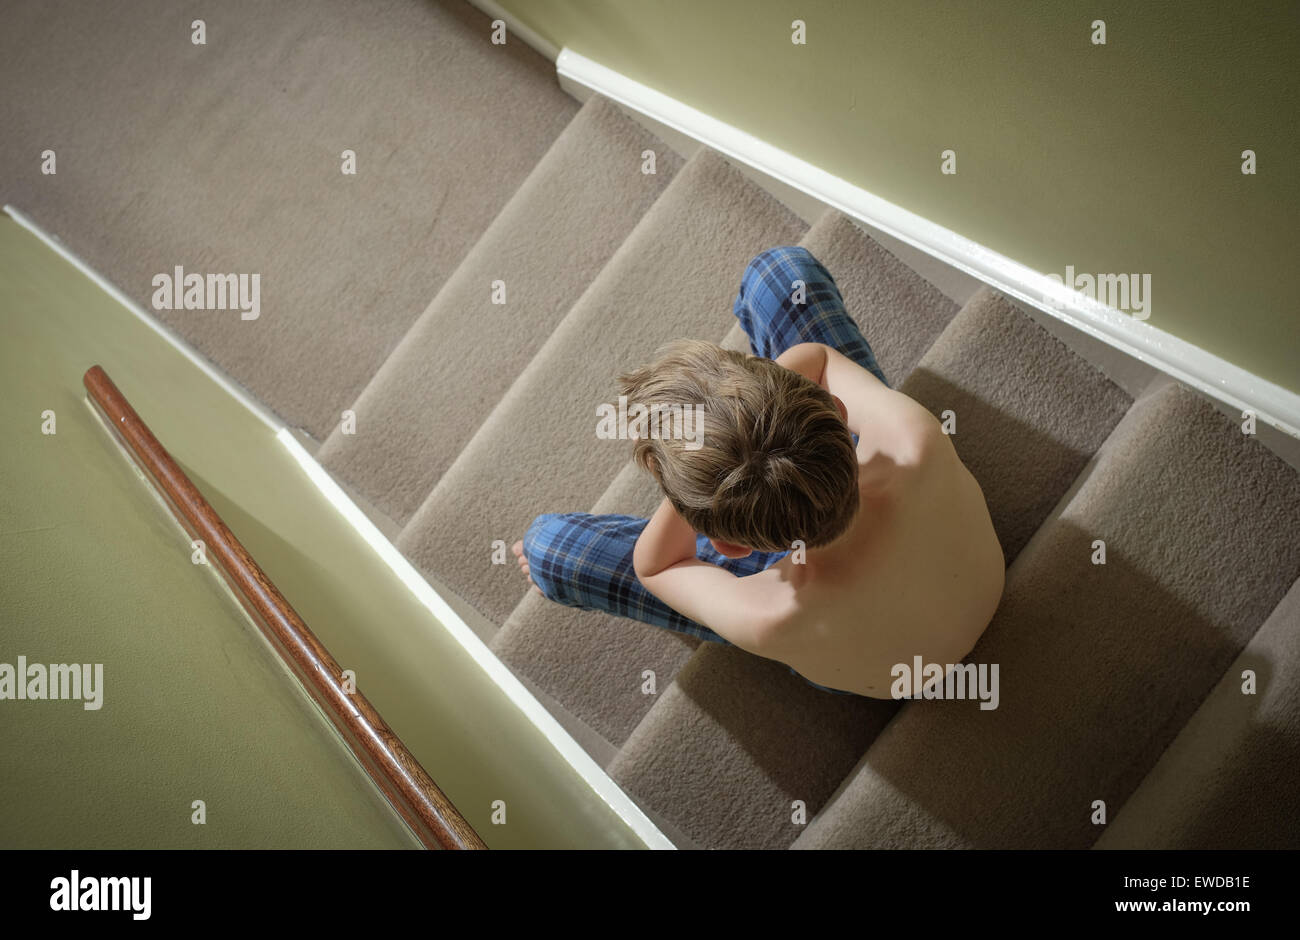 A child sitting on the stairs with his head in his hands looking upset Stock Photo